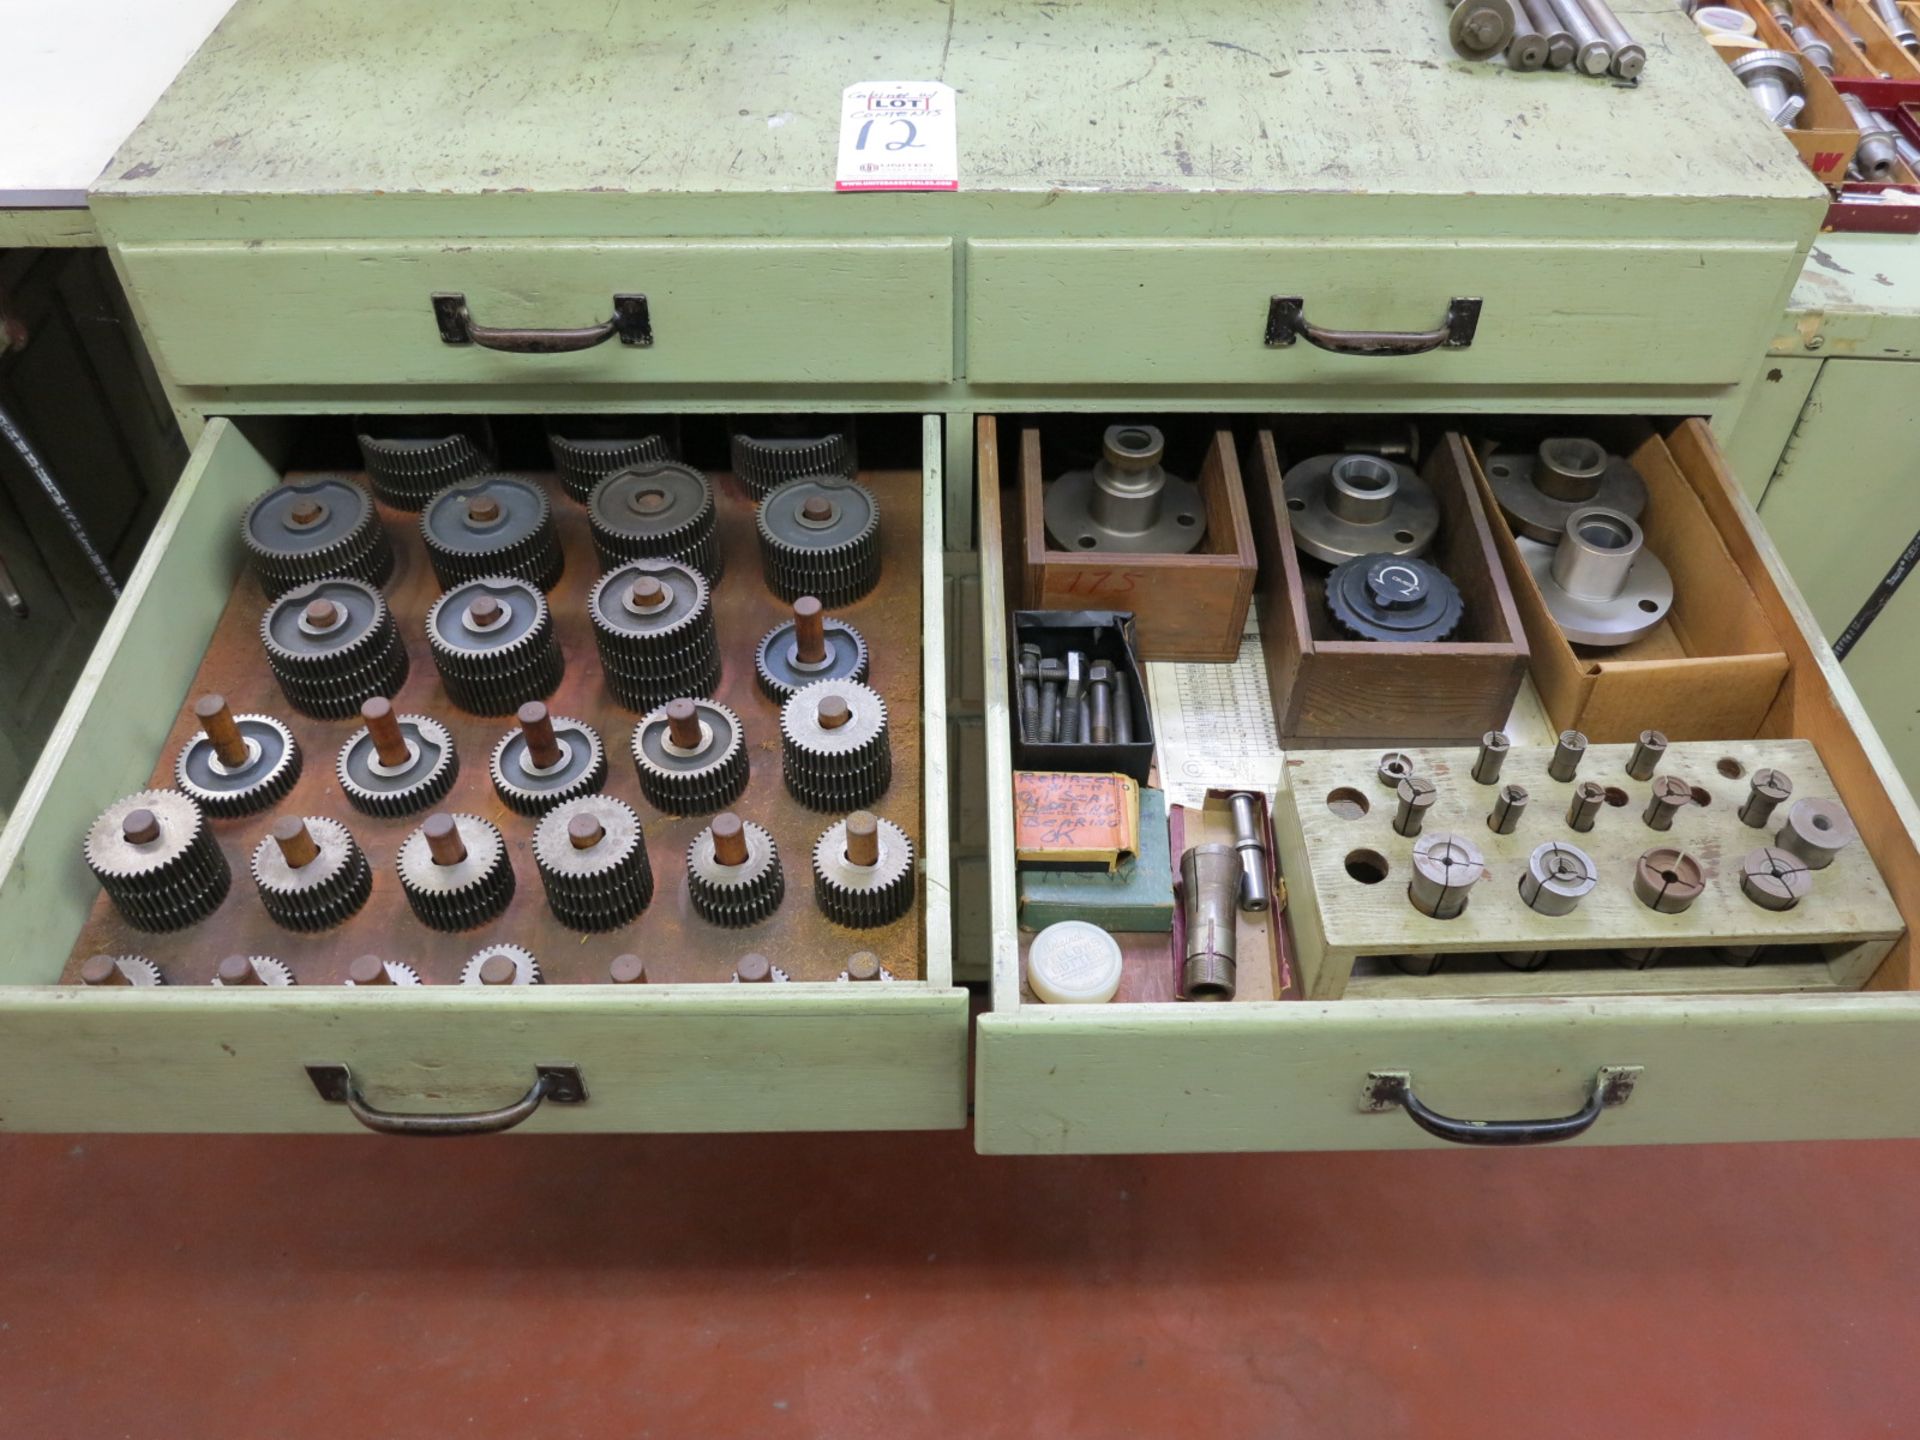 10-DRAWER WOOD CABINET, W/ CONTENTS TO INCLUDE: 7-TYPE HSS GEAR SHAPER CUTTERS, SIZE 22 TO 96 AND - Image 3 of 6